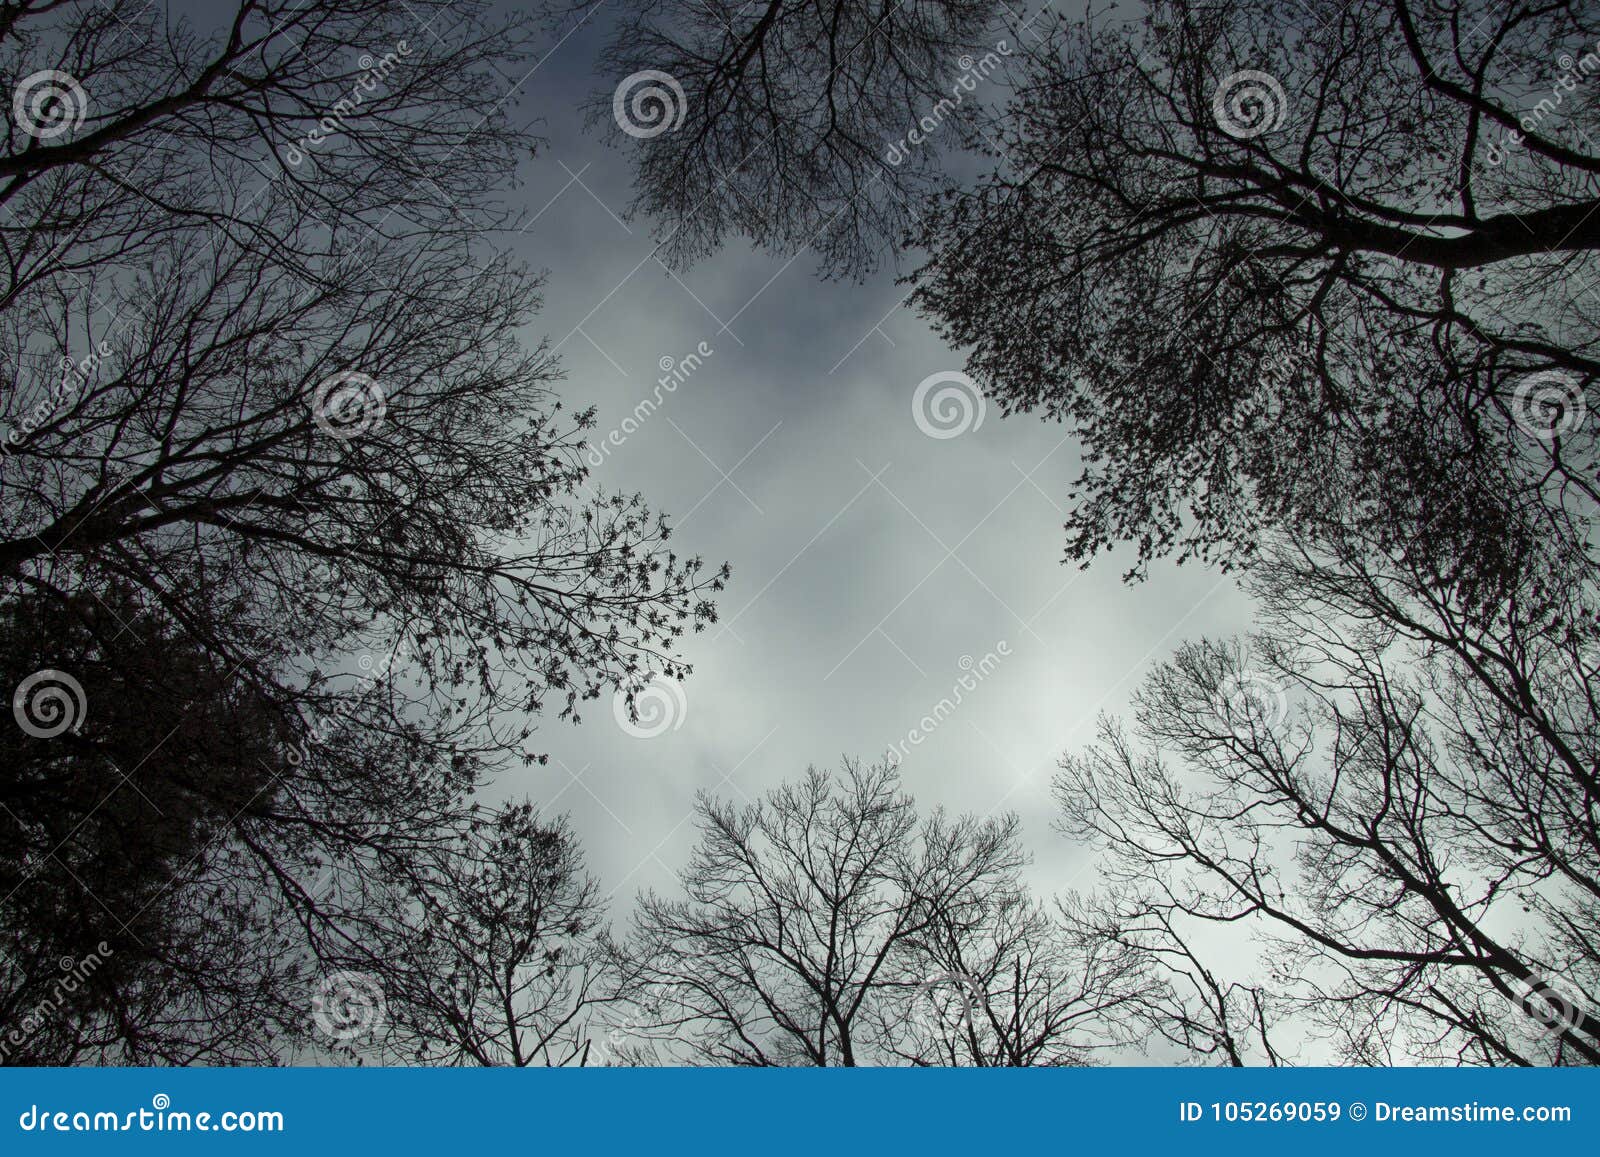 An ominous forest stock image. Image of scary, creepy - 105269059